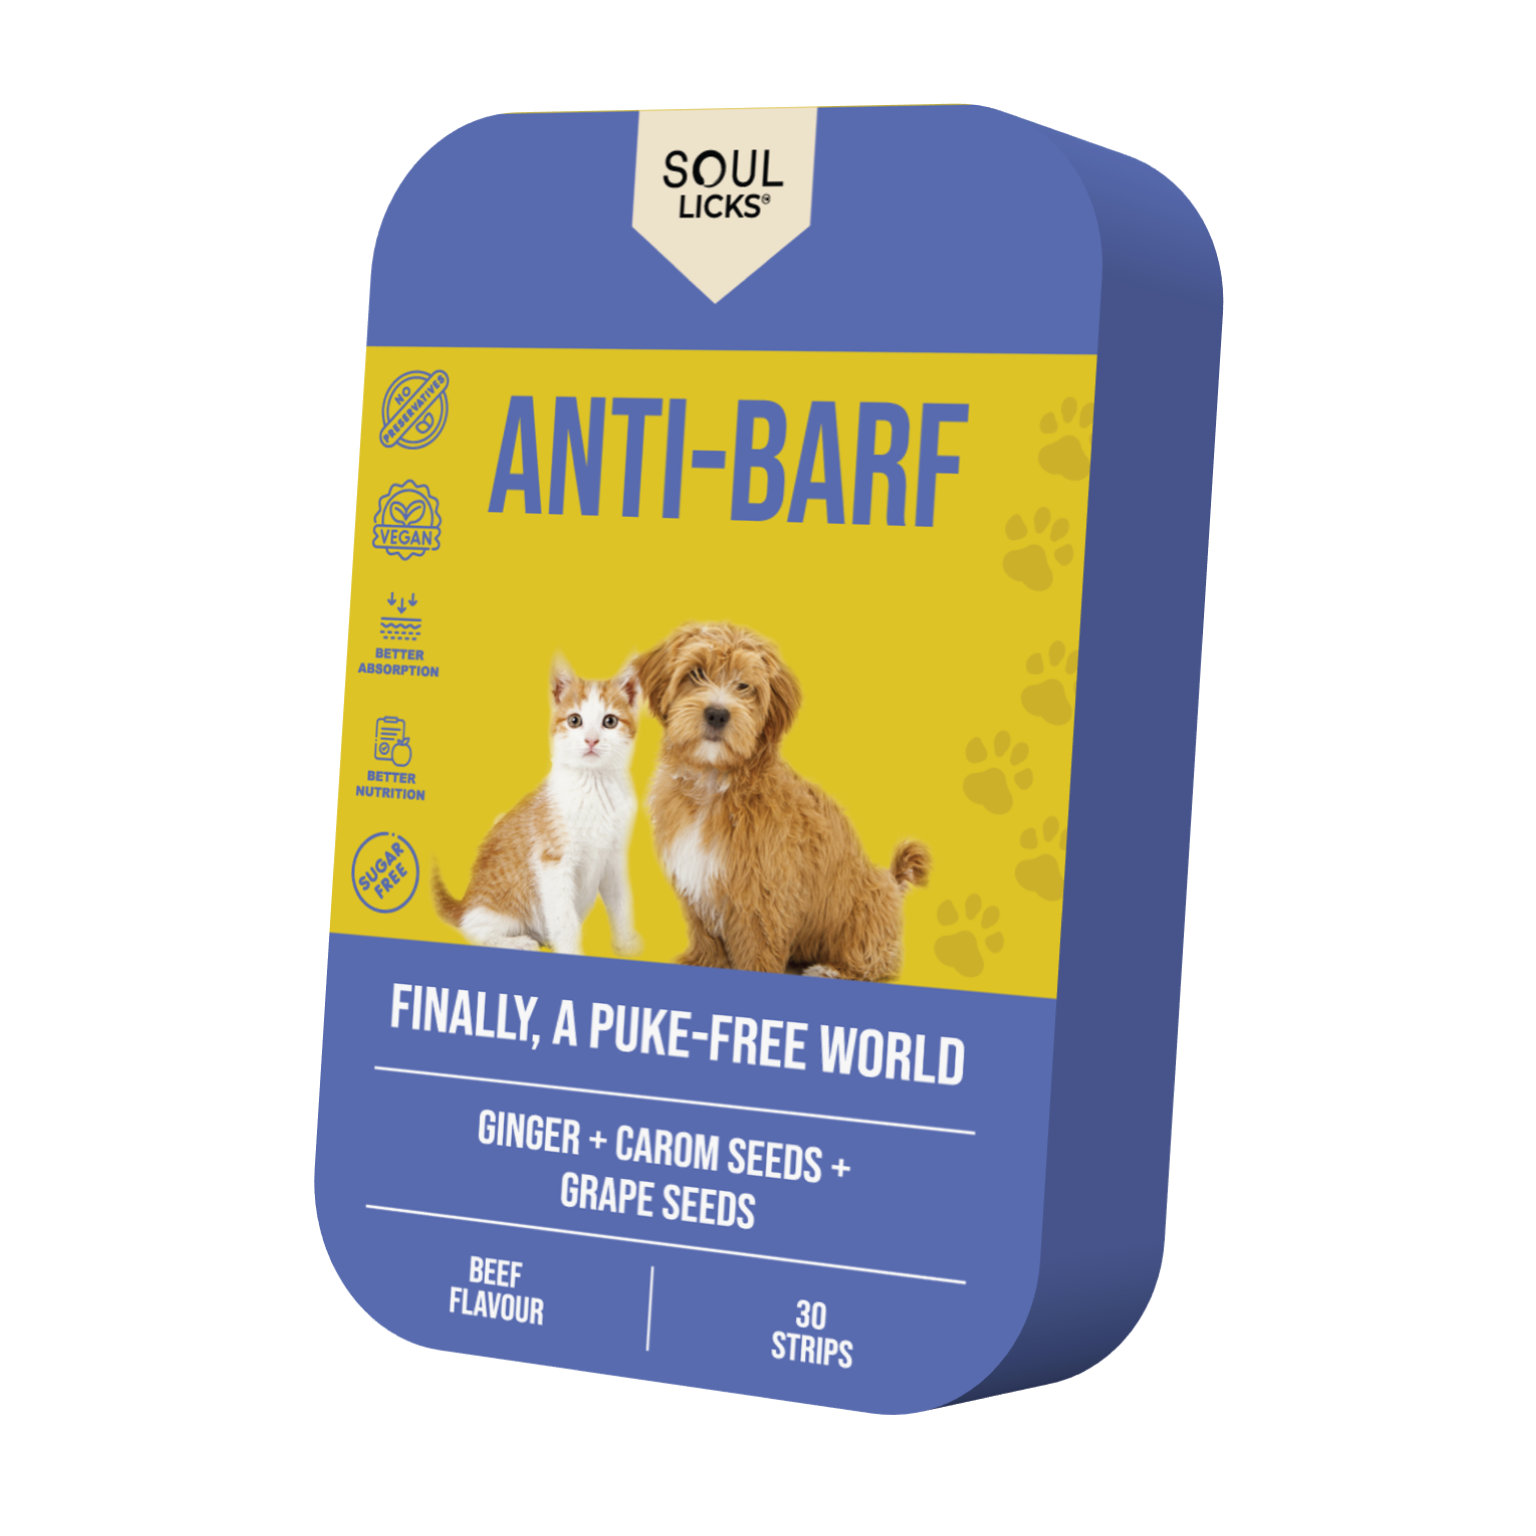 Anti-Barf - Nausea relief for your pet friend!